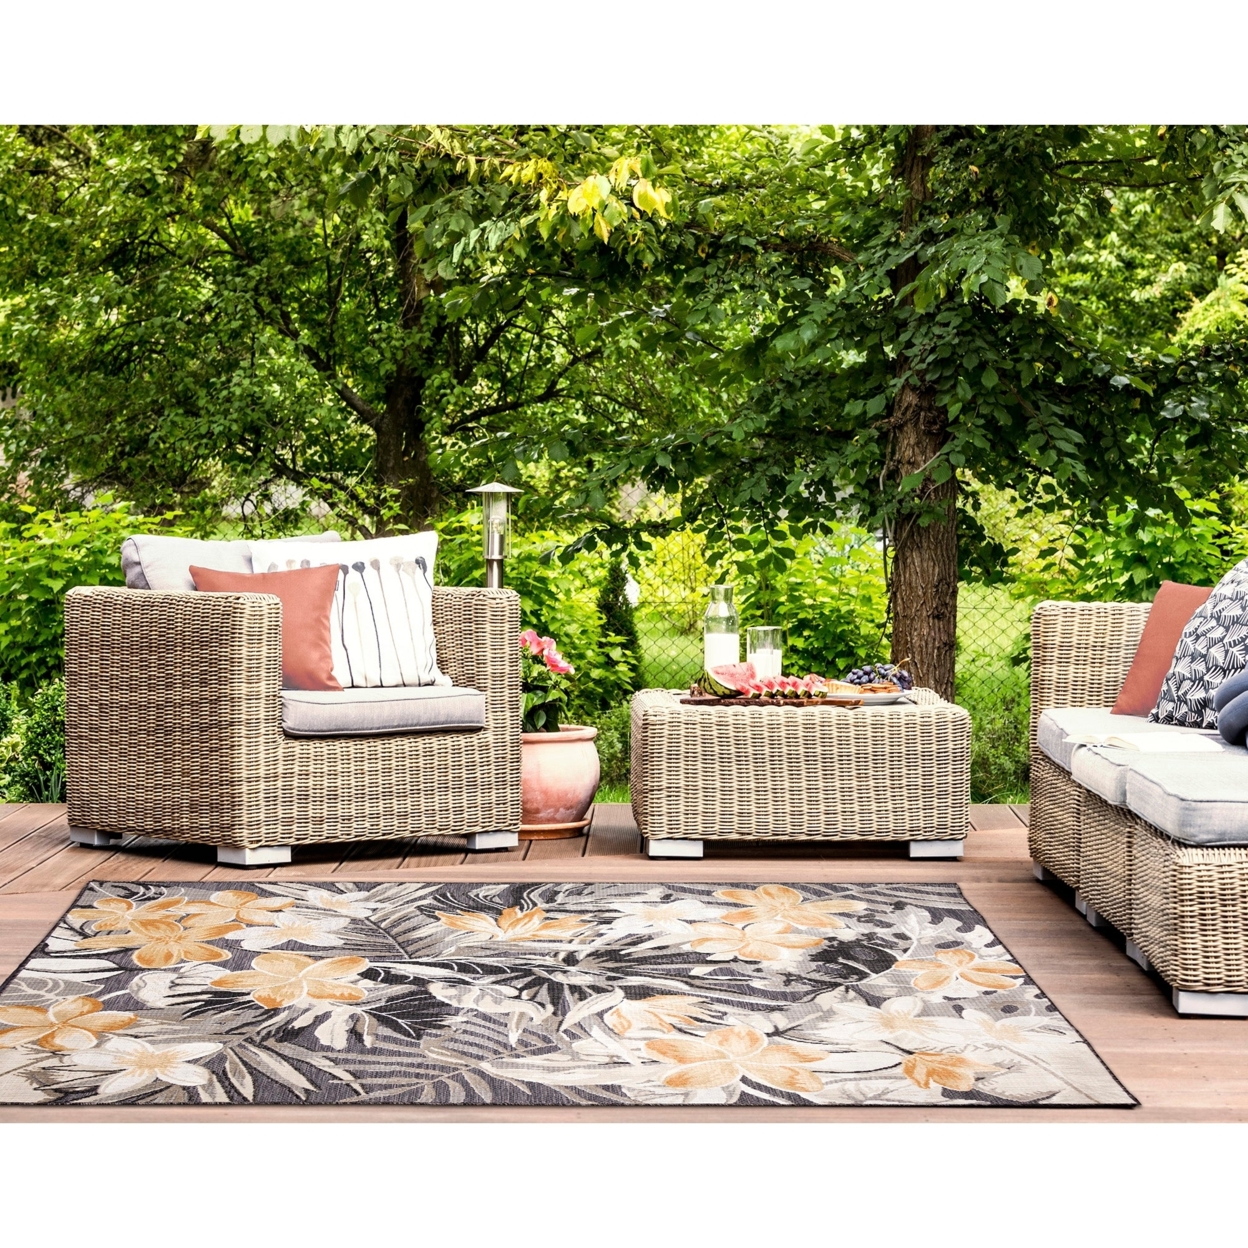 Liora Manne Canyon Paradise Indoor Outdoor Area Rug Charcoal - 4'9 X 7'6